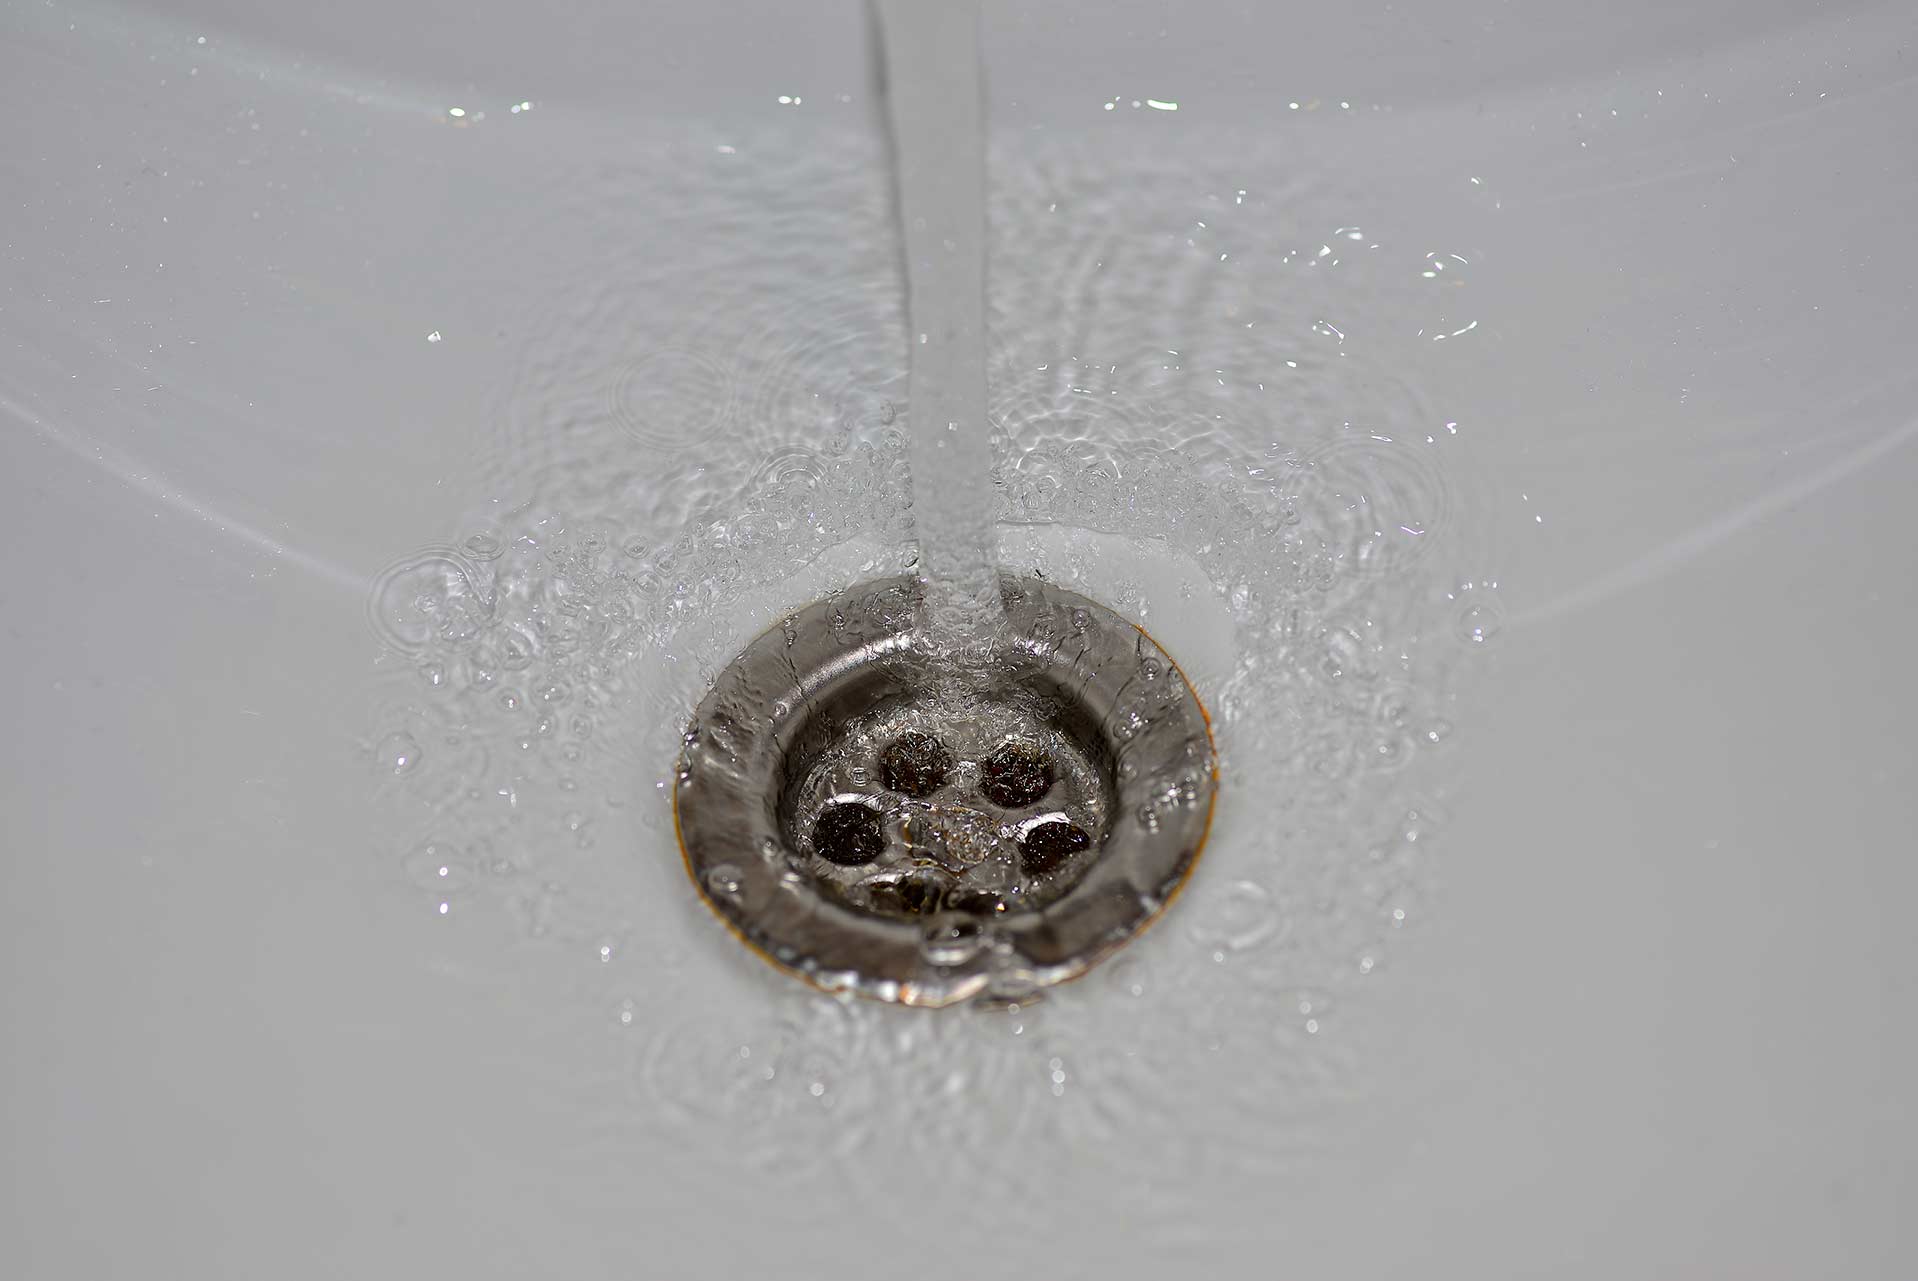 A2B Drains provides services to unblock blocked sinks and drains for properties in Hove.